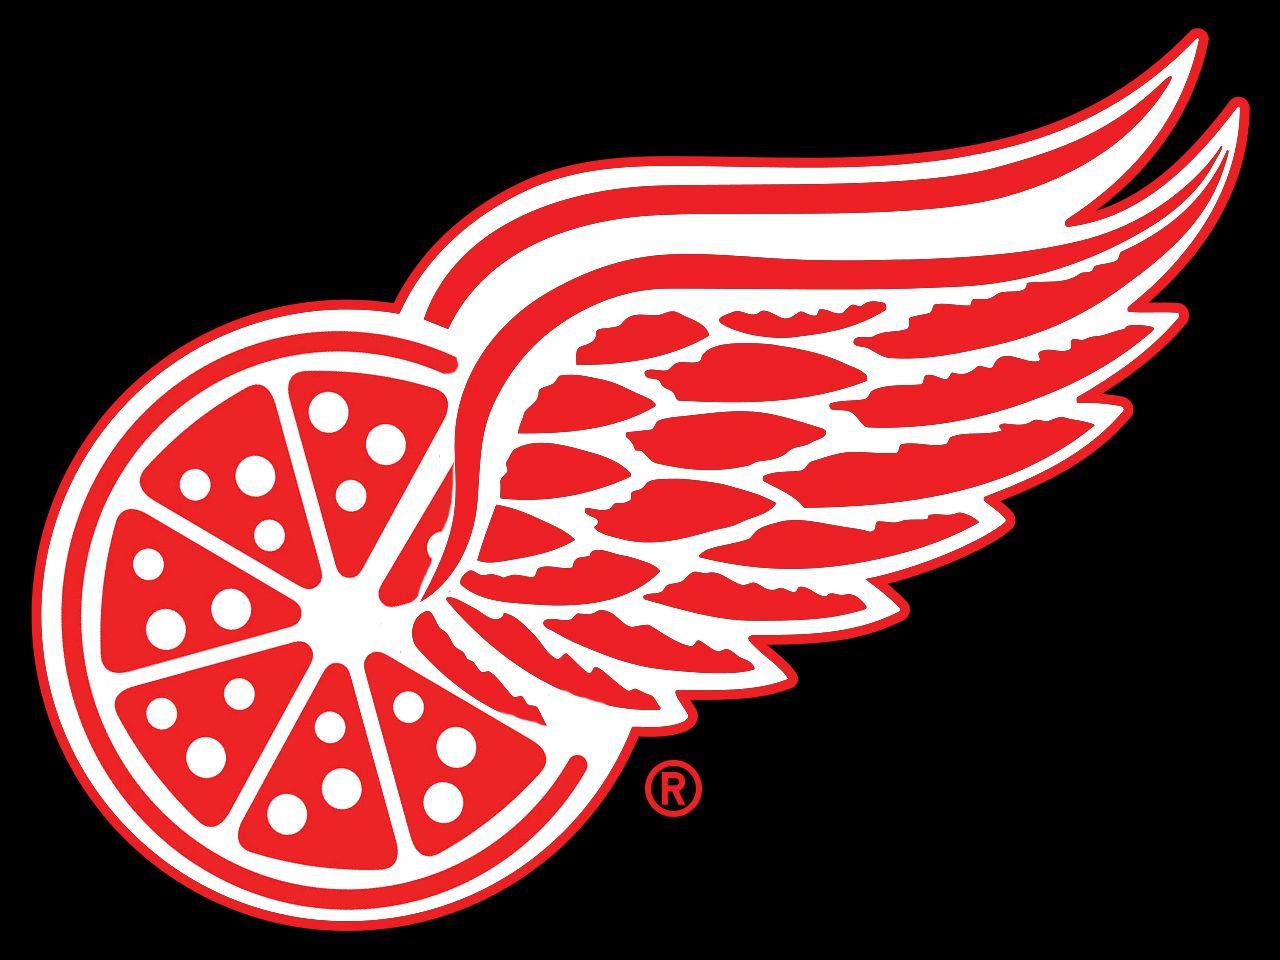 New Detroit Red Wings Logo - Red Wings new logo - Imgur